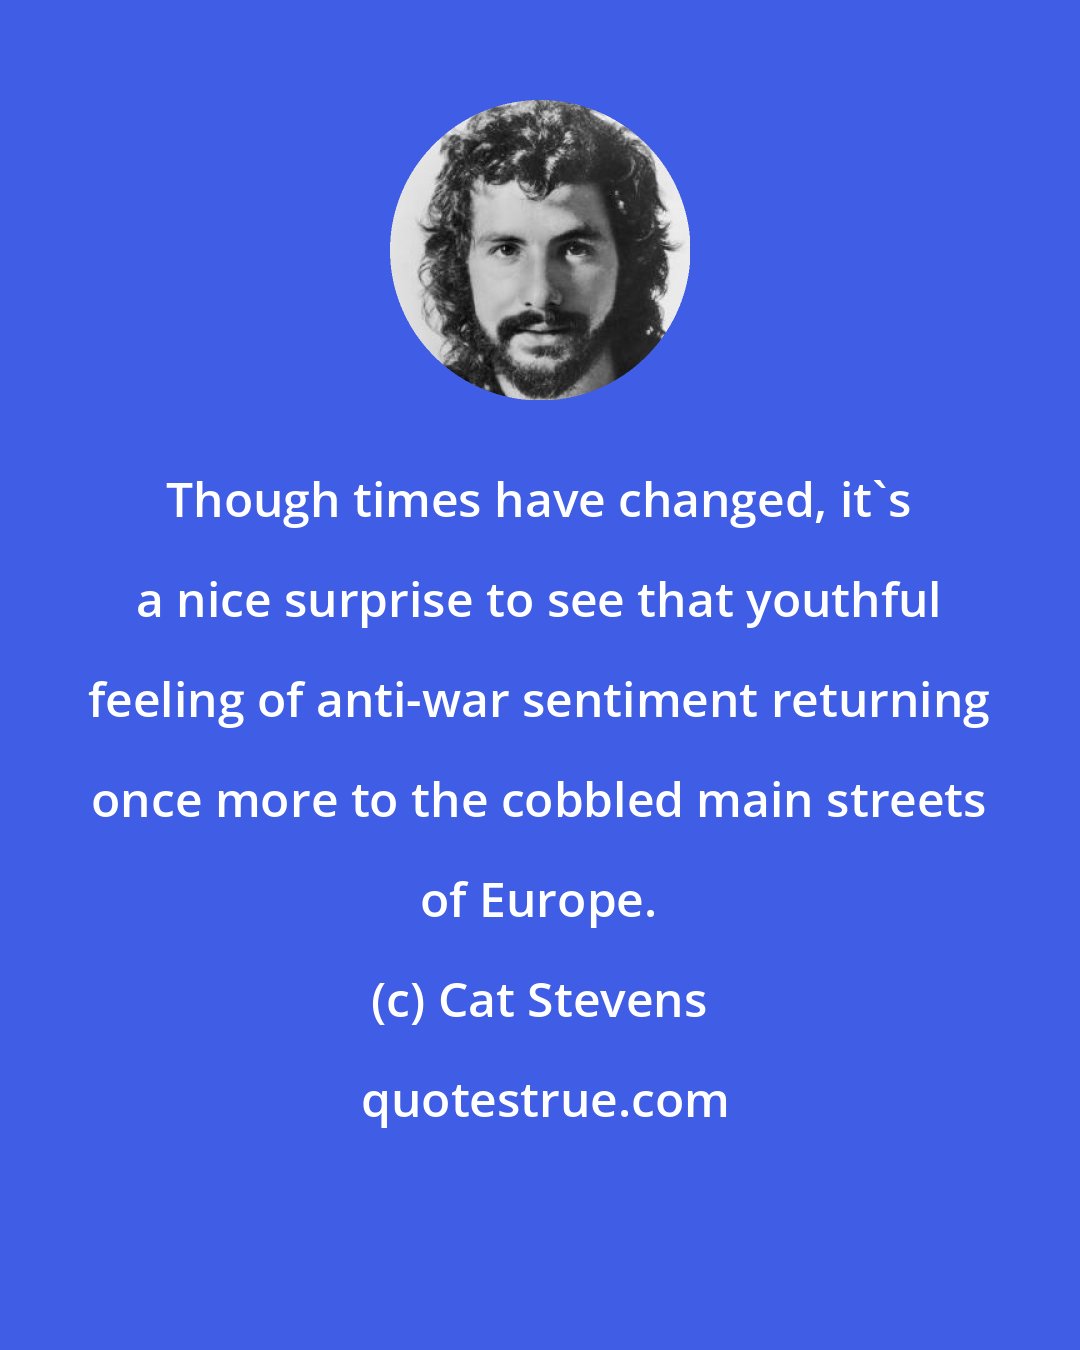 Cat Stevens: Though times have changed, it's a nice surprise to see that youthful feeling of anti-war sentiment returning once more to the cobbled main streets of Europe.